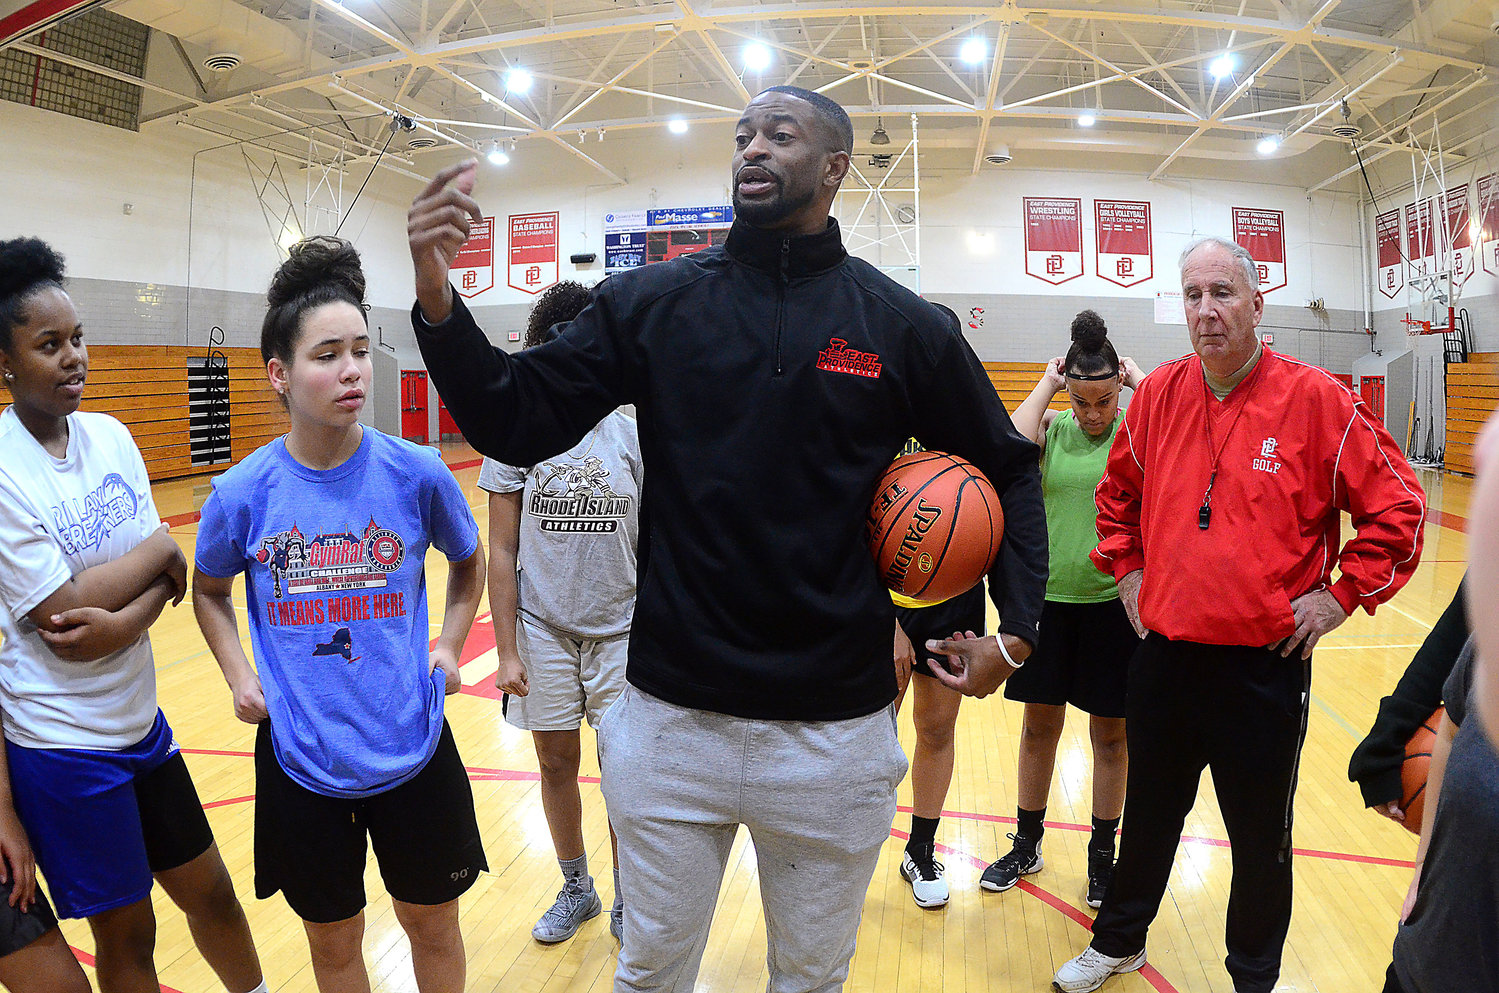 City native and alum Tshombe “Bay” Lambert talks to members of the team before a practice last week when he took over as the new head coach for the East Providence High School girls’ basketball program.